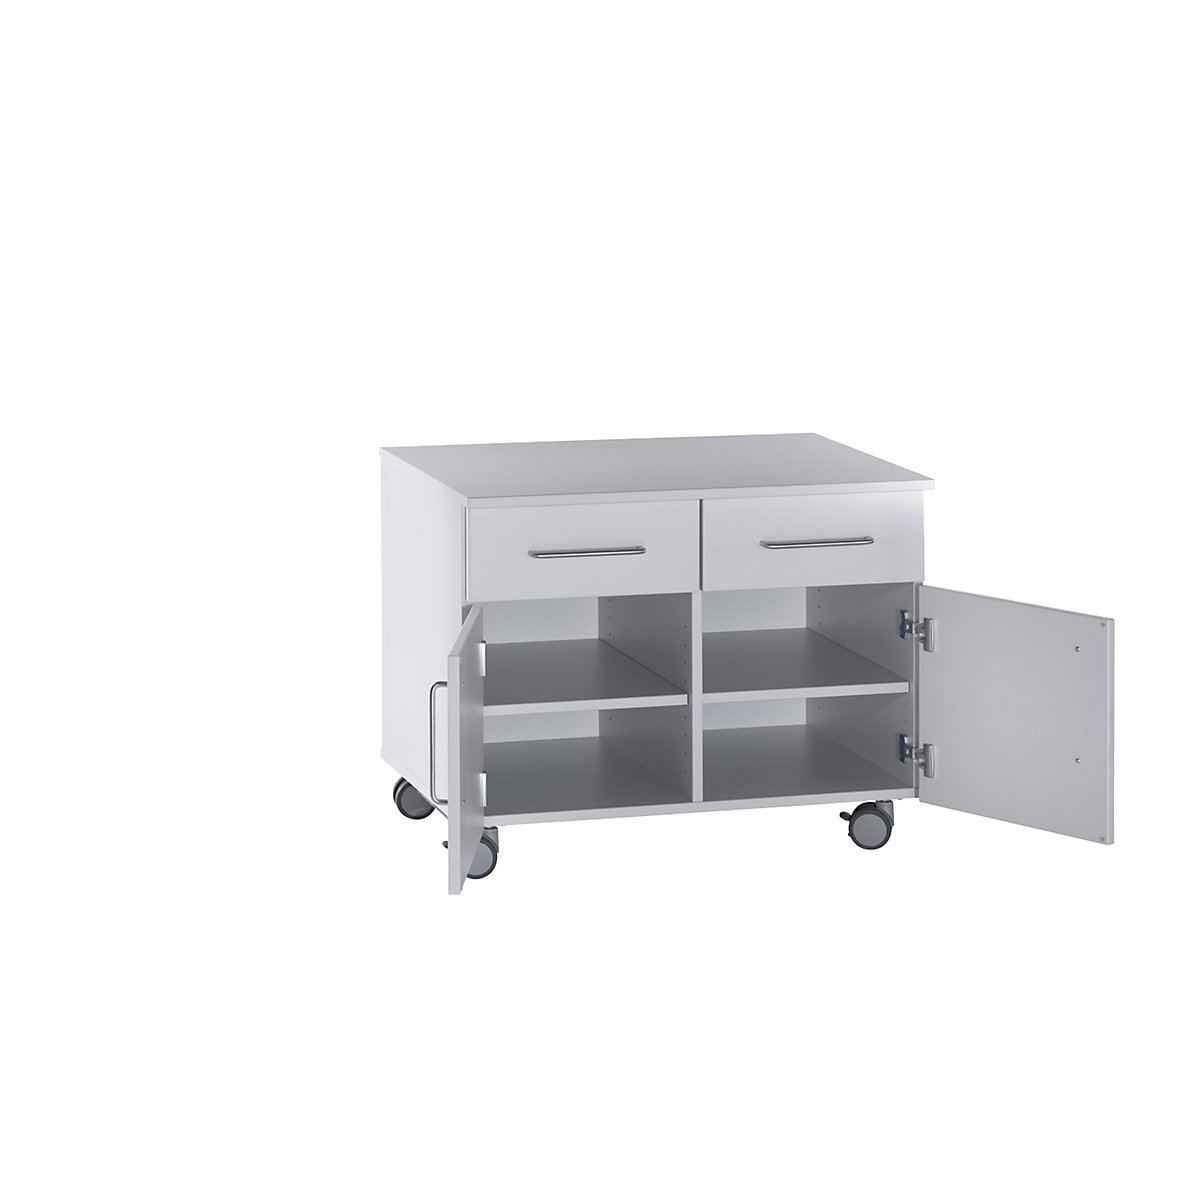 Laboratory base cupboard, low, 2 drawers, 2 doors, 2 shelves, 1 central partition, width 1136 mm-1